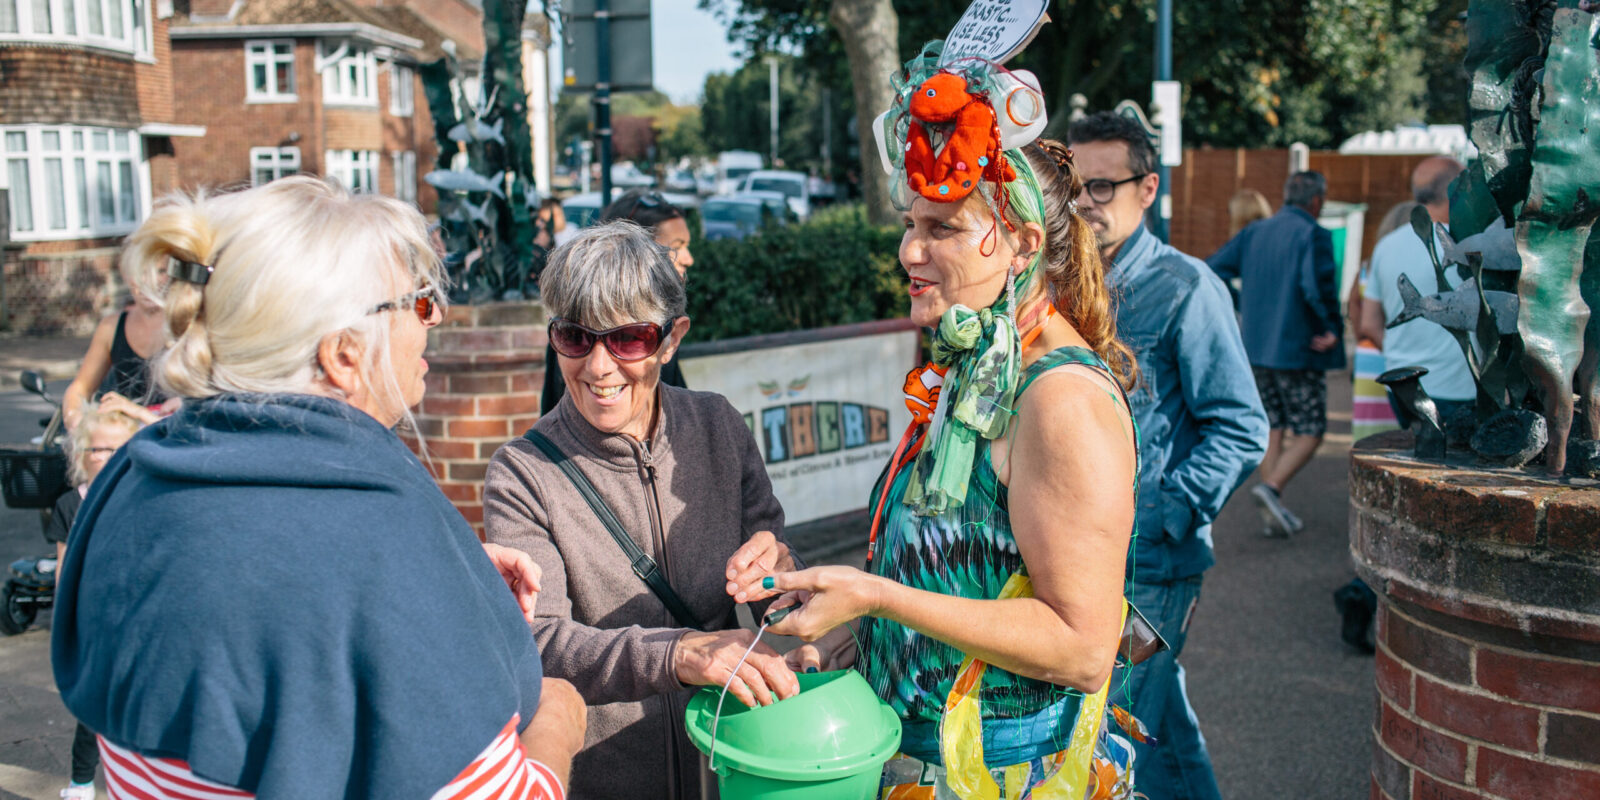 Festival attendees placing money in a donation bucket while talking to event staff